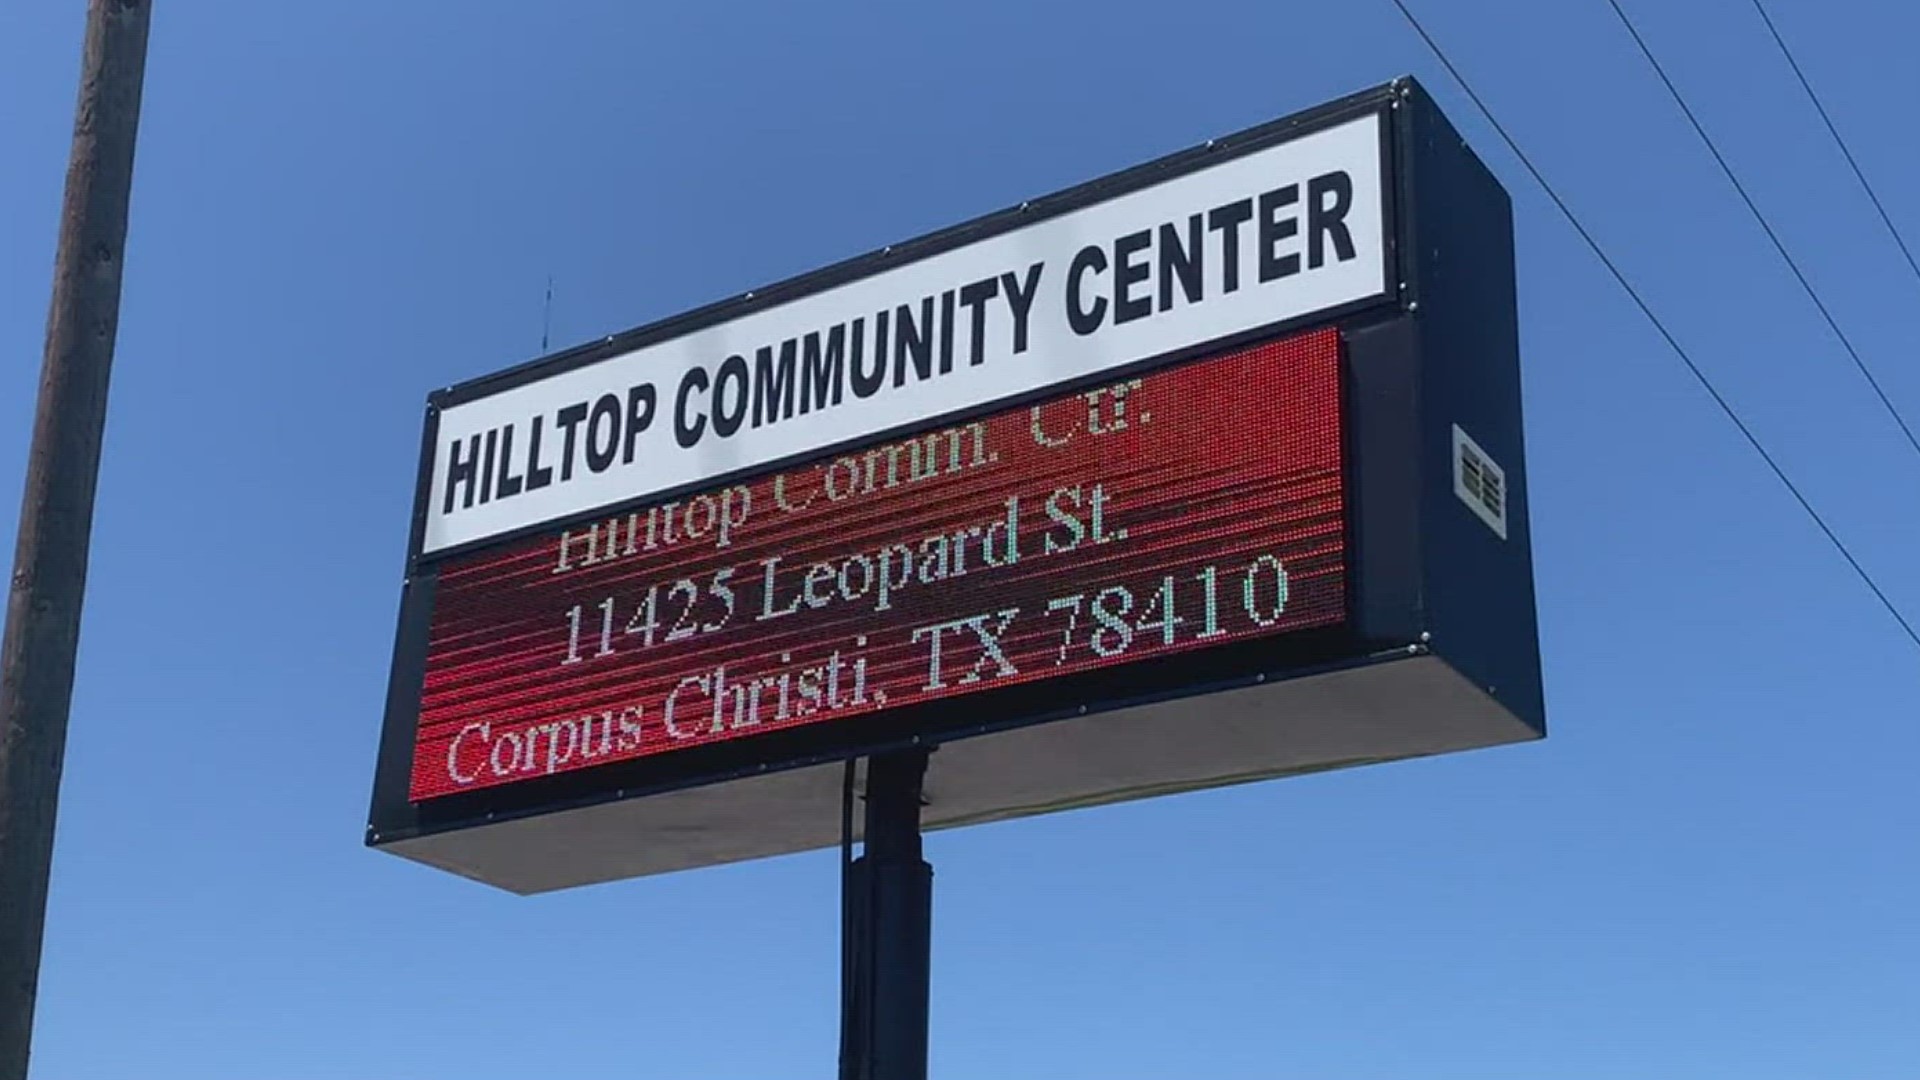 Precinct 1 Commissioner Robert Hernandez believes Republicans are trying to derail his $9 million project to renovate and upgrade the Hilltop Community Center.